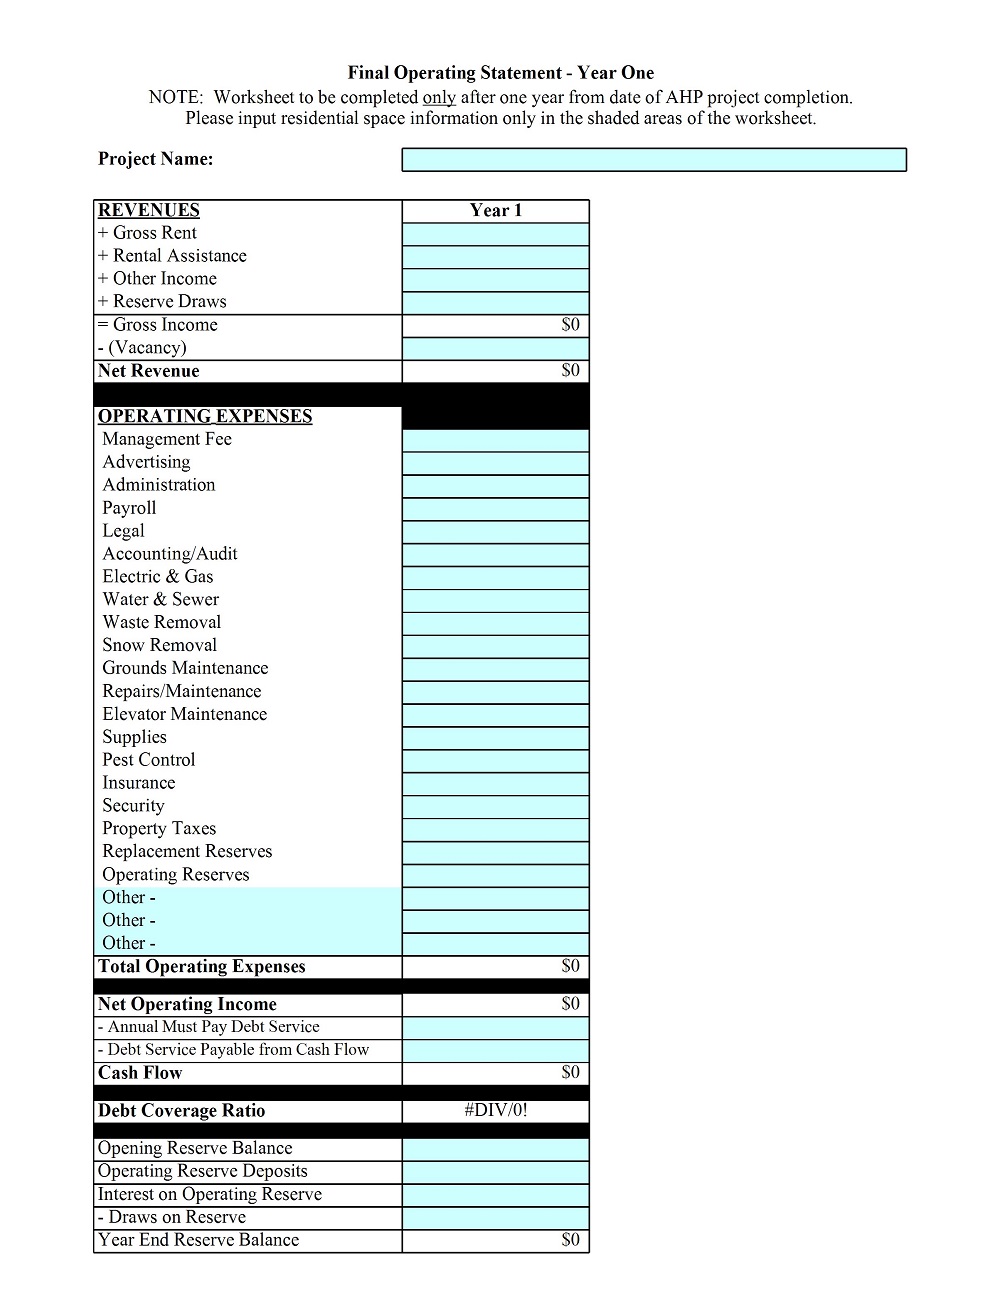 Final Operating Statement Template Excel